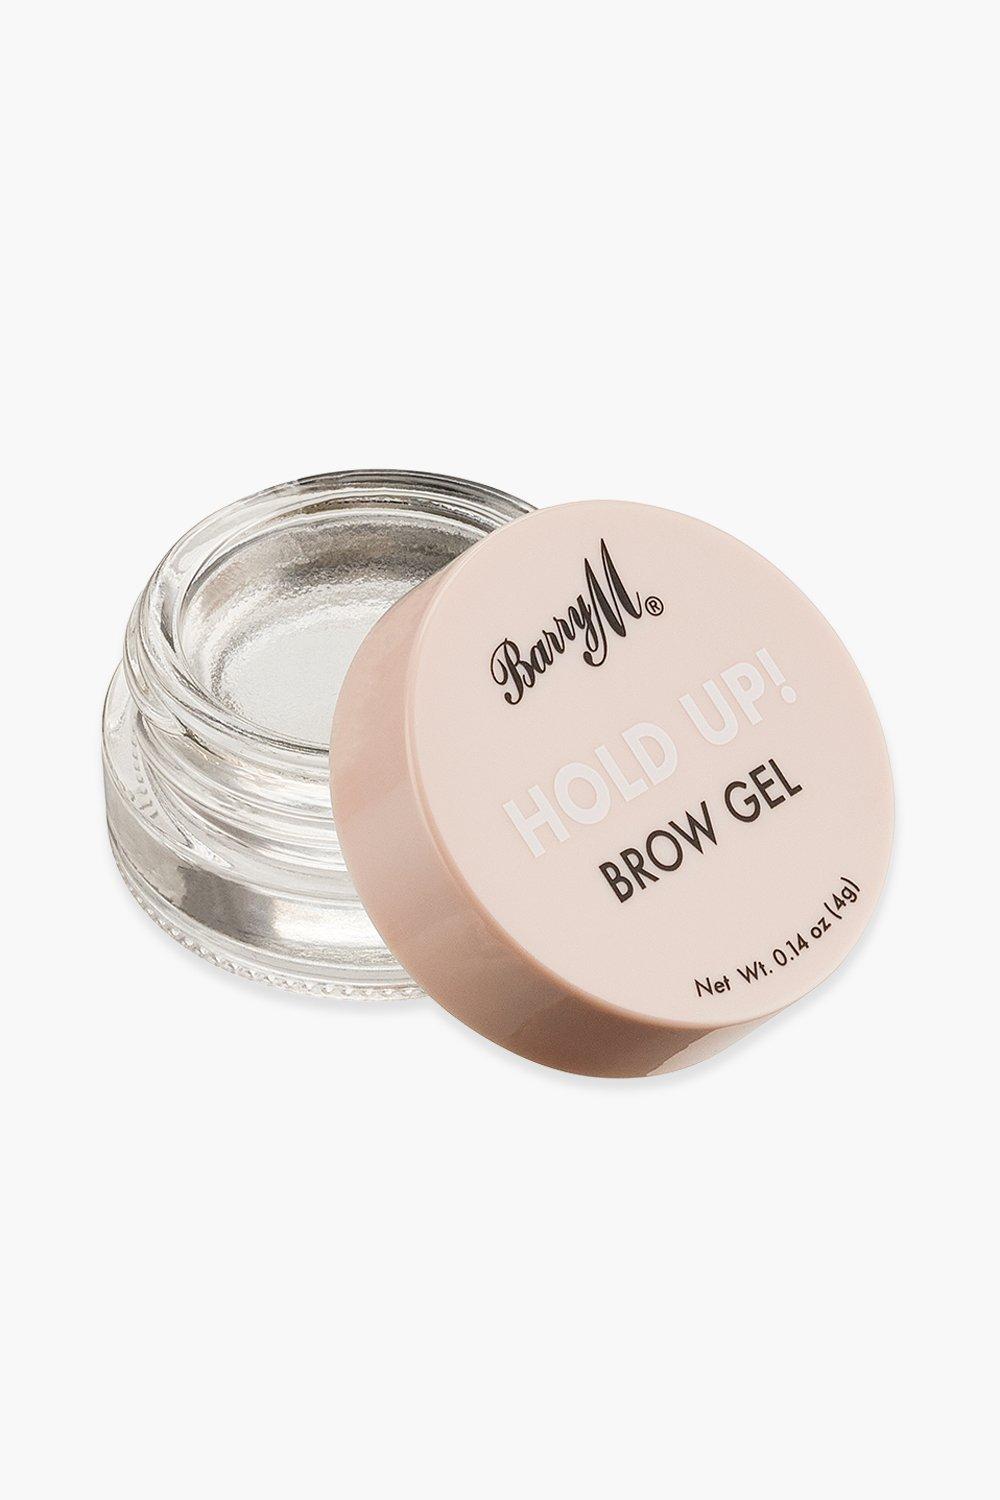 Barry M Hold Up! Brow Gel, Brown